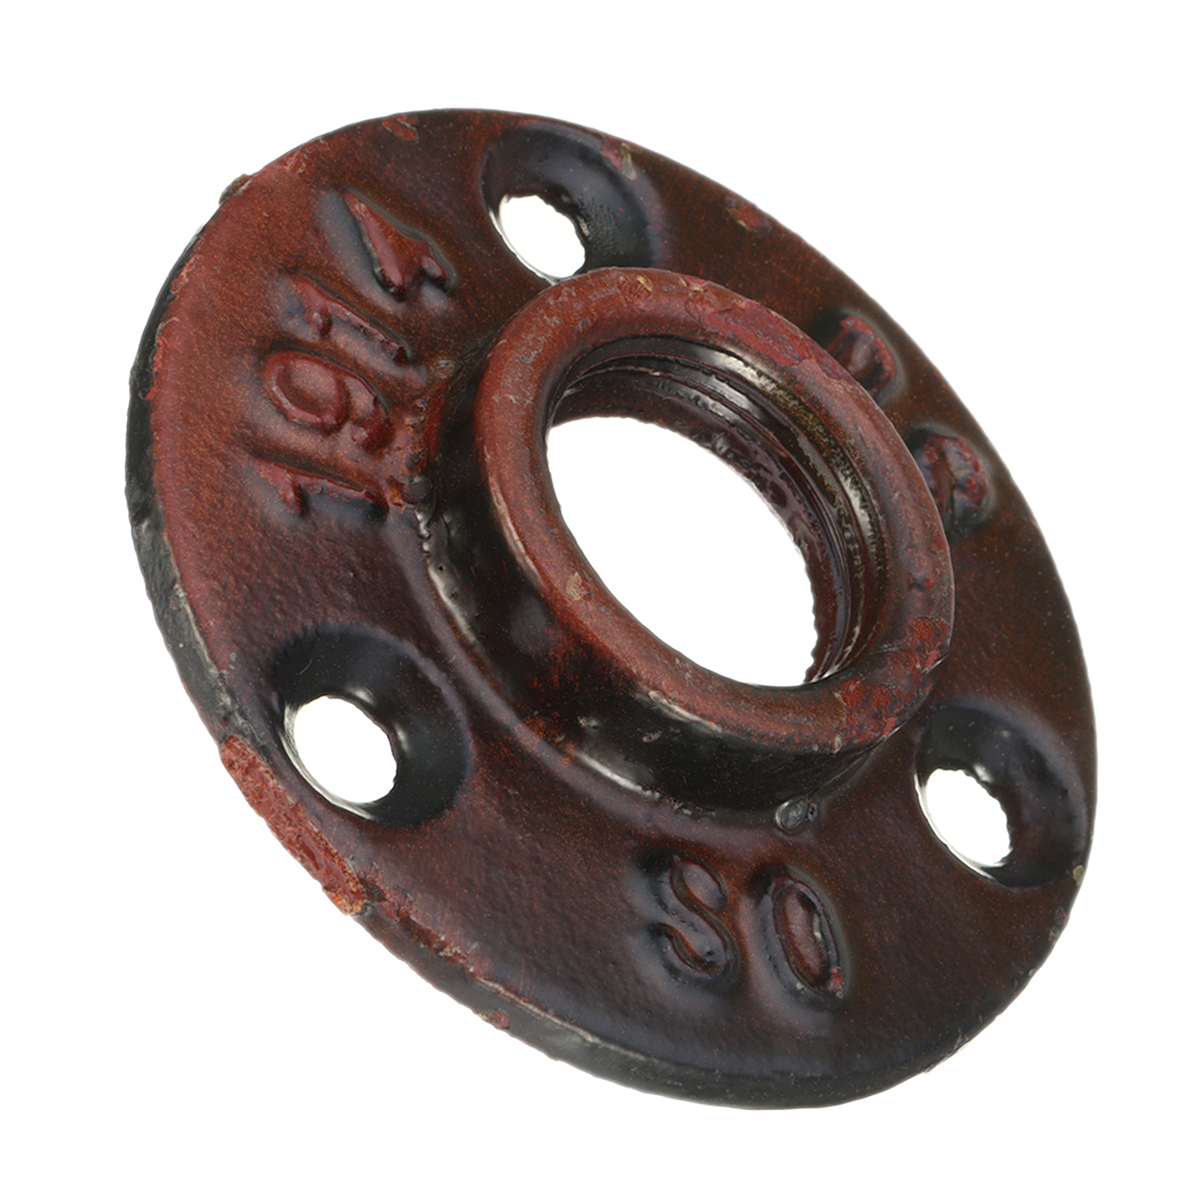 

1/2 Inch 3/4 Inch Decorative Malleable Floor Flange Iron Pipes Fittings Plate Wall Mount DN20